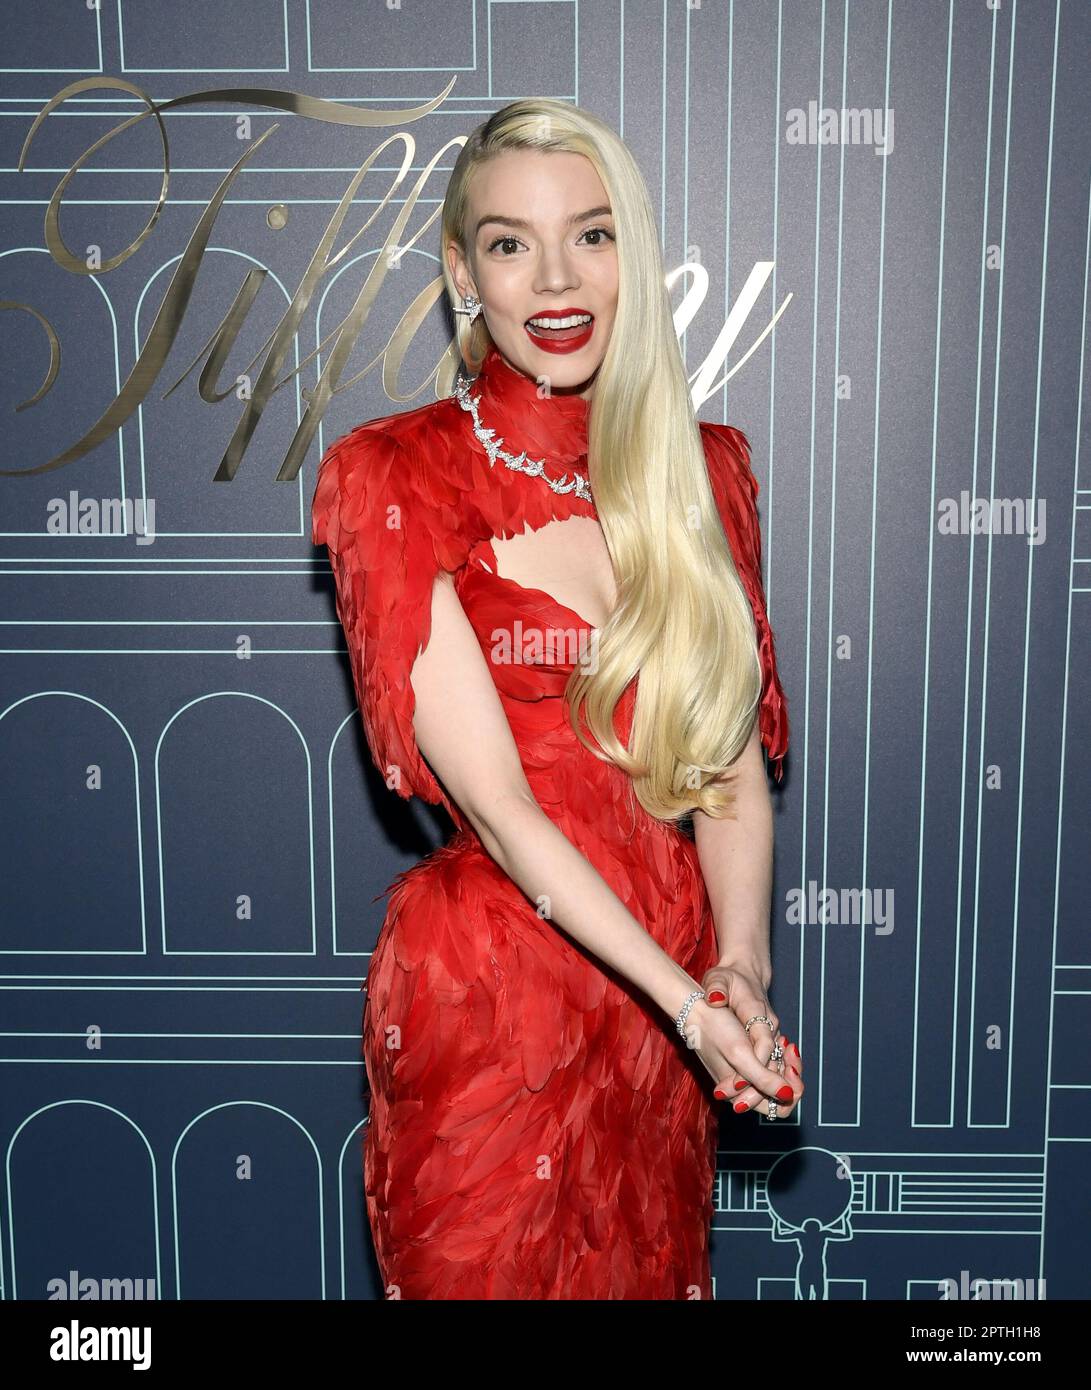 21metgala on X: Anya Taylor-Joy attends as Tiffany & Co. Celebrates the  reopening of NYC Flagship store.  / X